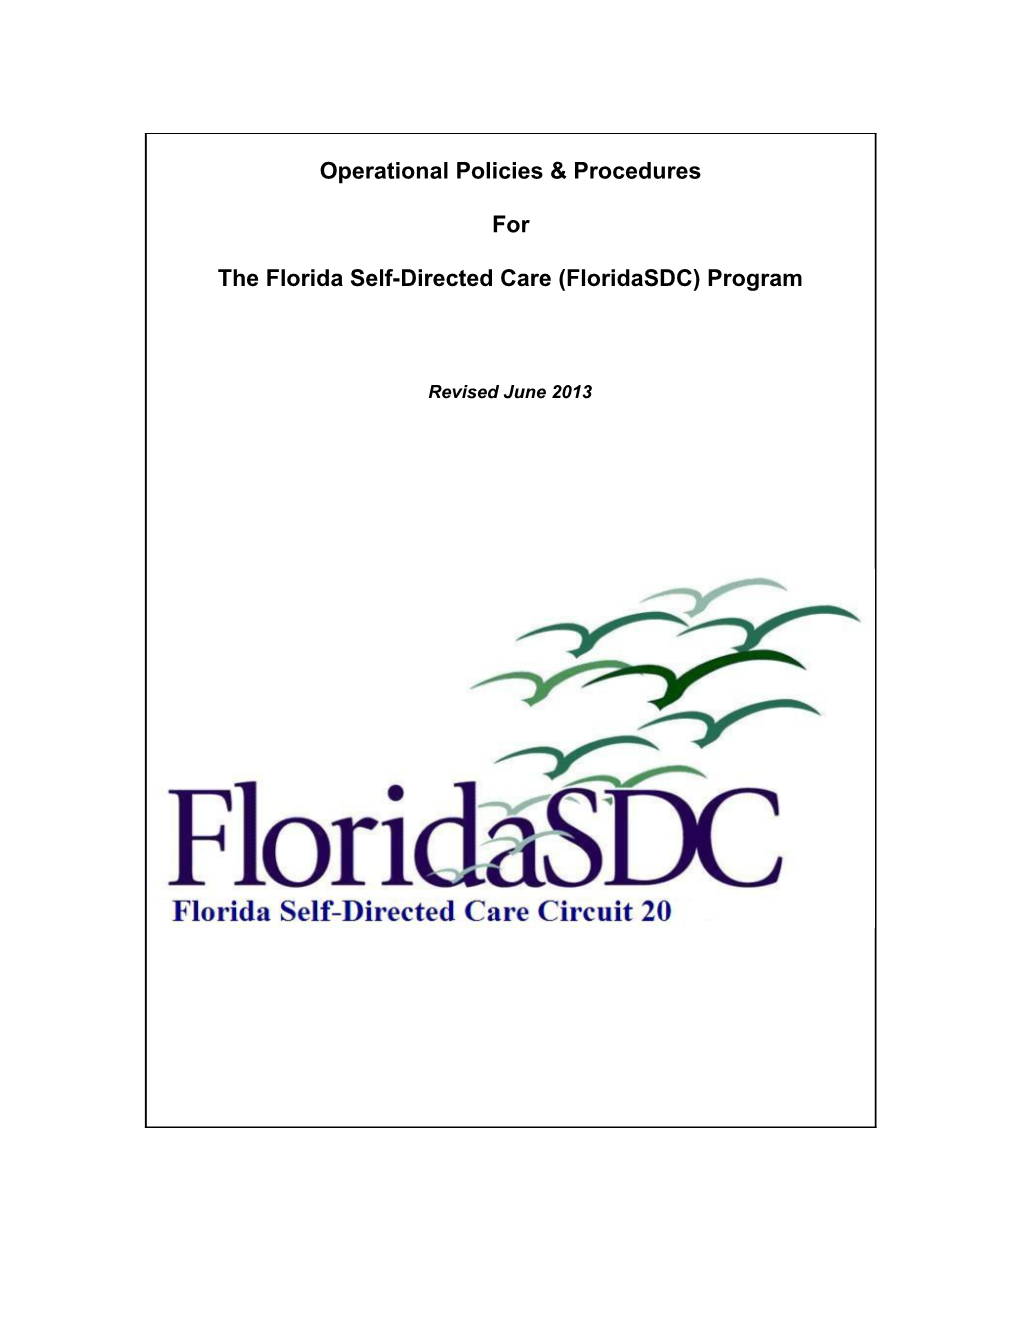 About the Florida Self-Directed Care (Floridasdc) Program 3